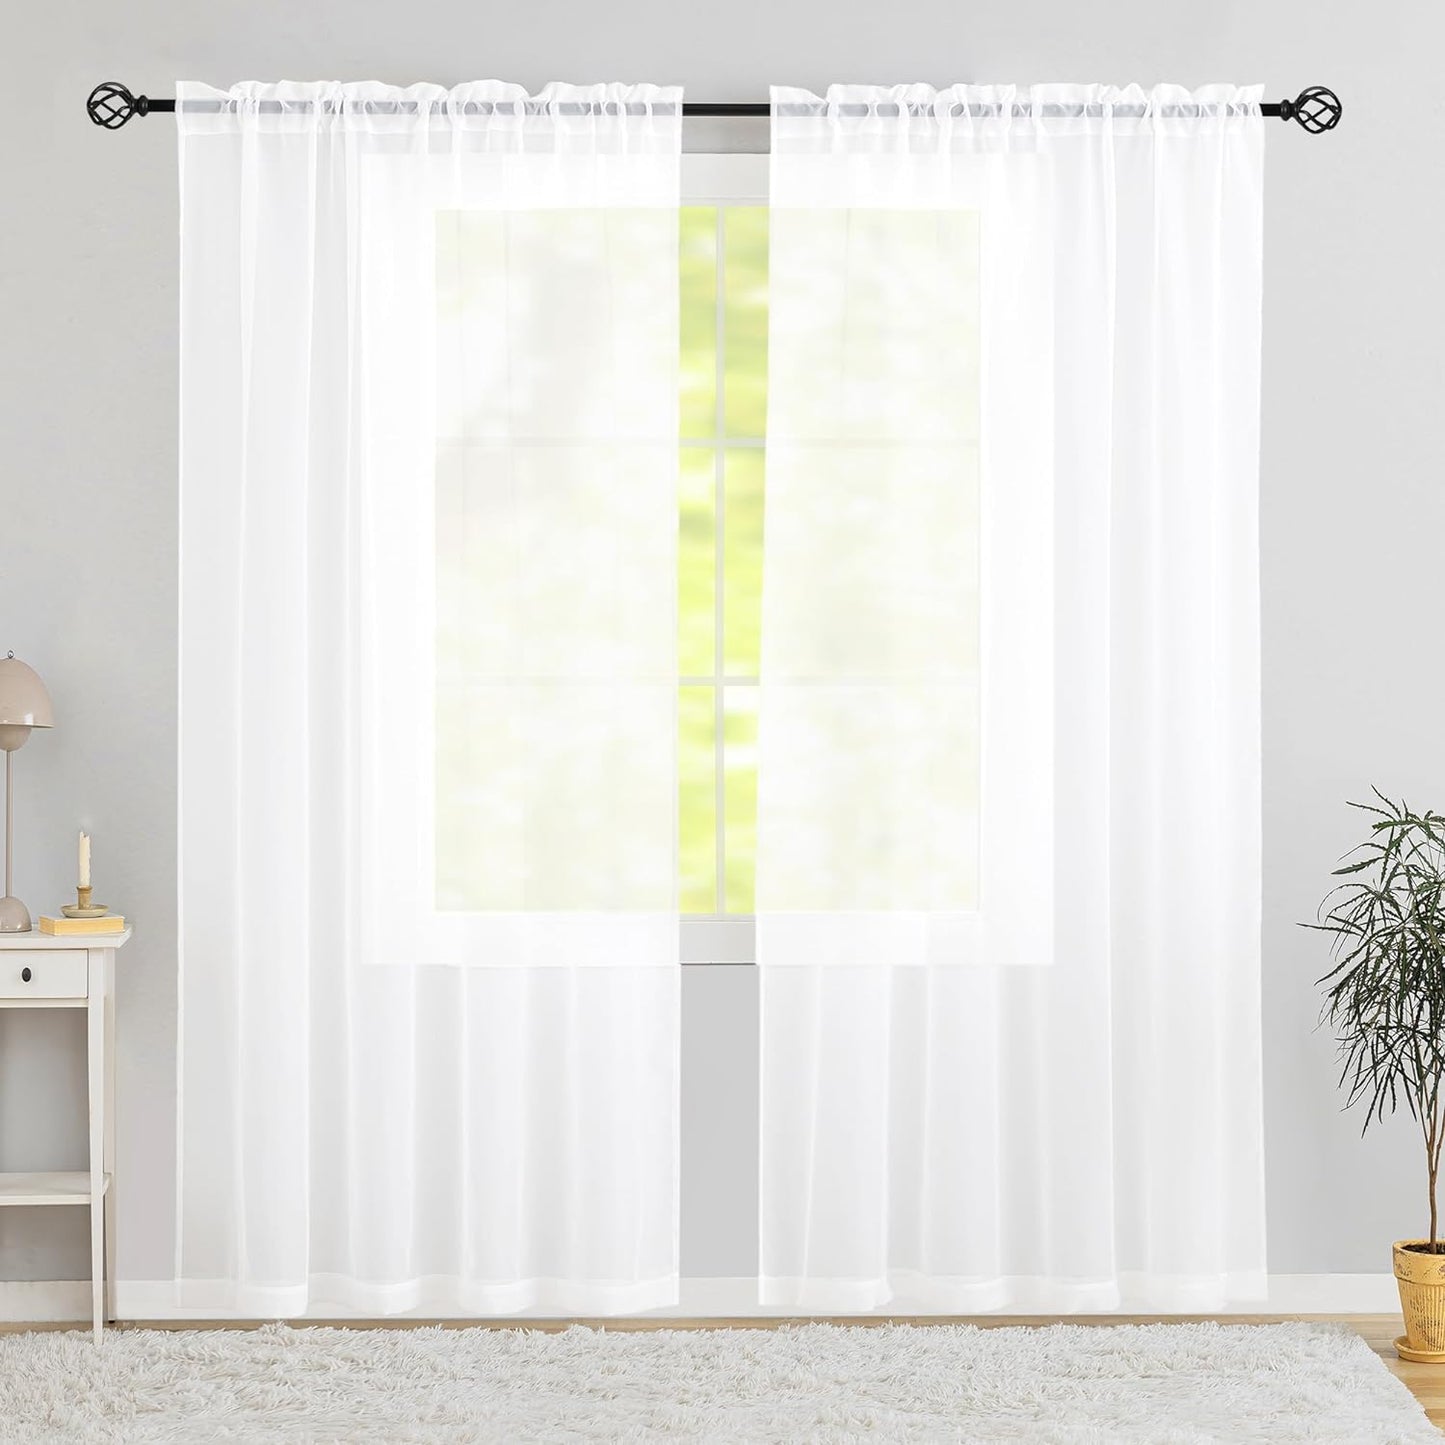 Semi Voile White Sheer Curtains 84 Inches Long 2 Panels Rod Pocket Window Treatment for Living Room Bedroom Dining Room(White 52" W X 84" L)  Karseteli White 60"W X 72"L 